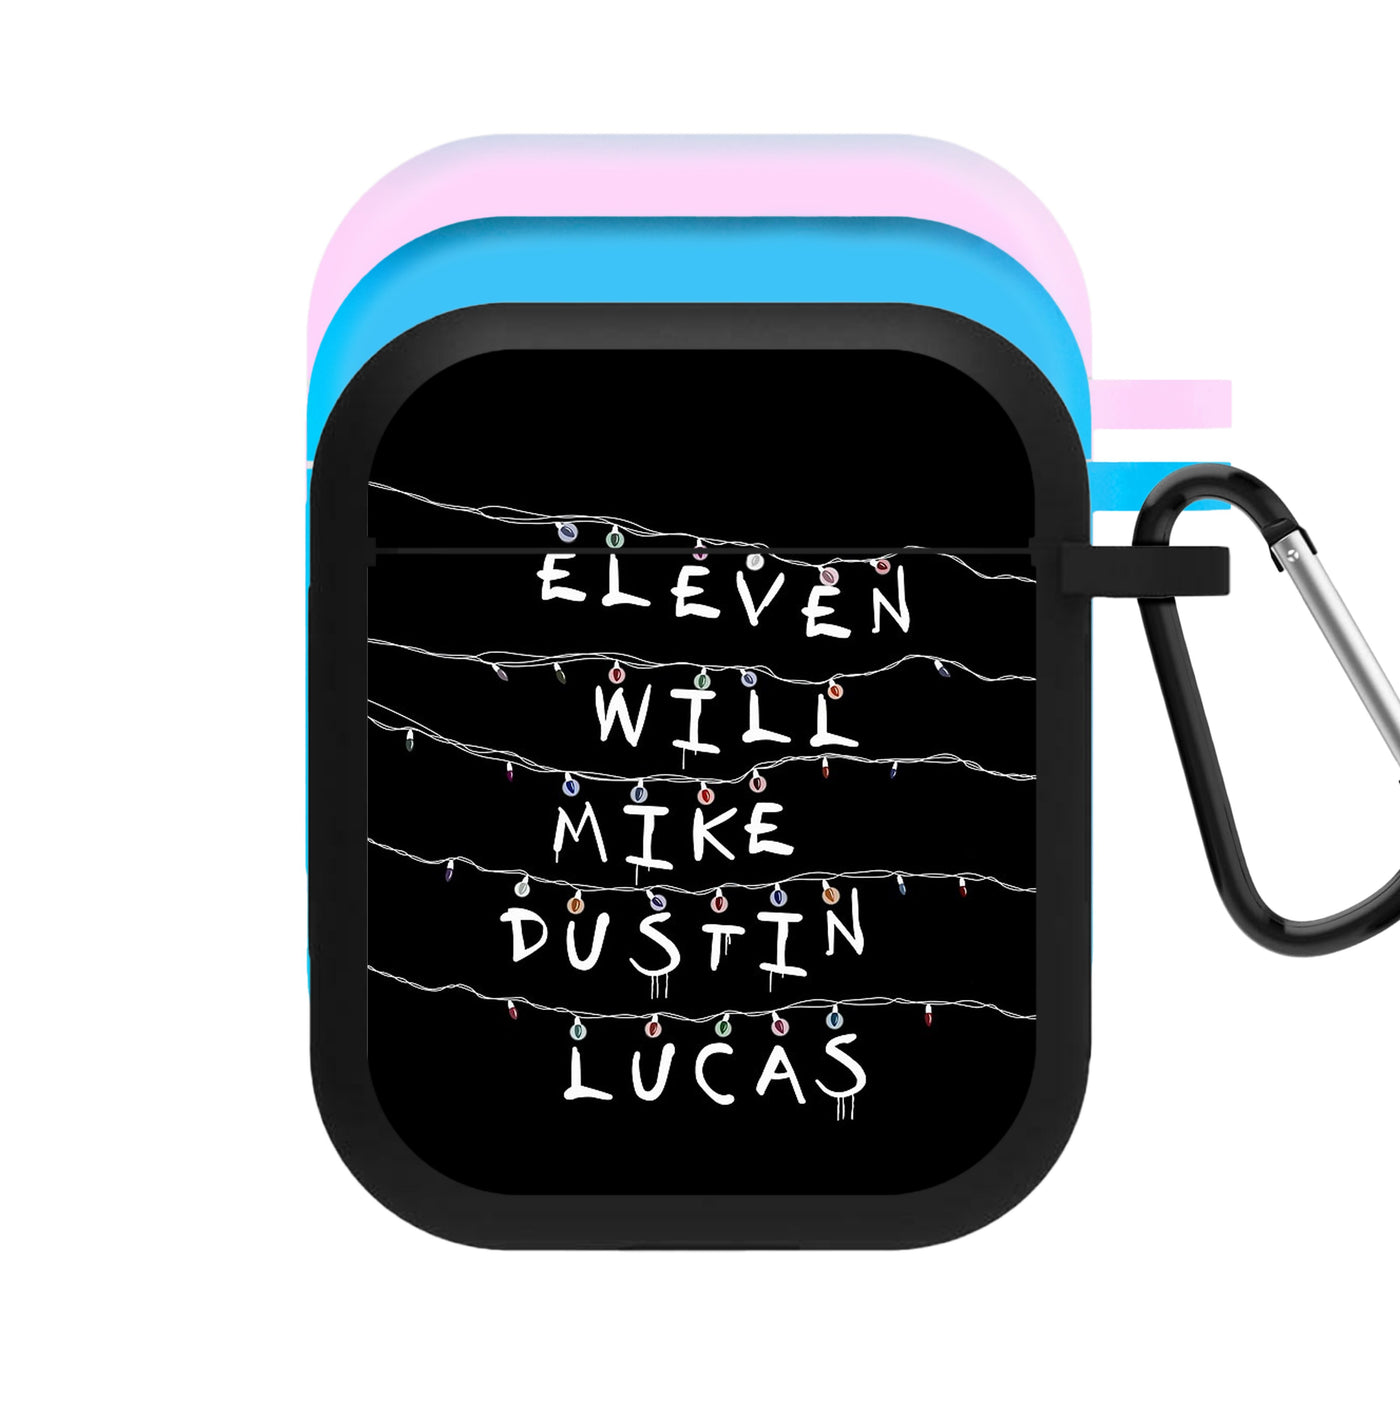 Eleven, Will, Mike, Dustin & Lucas - Stranger Things AirPods Case